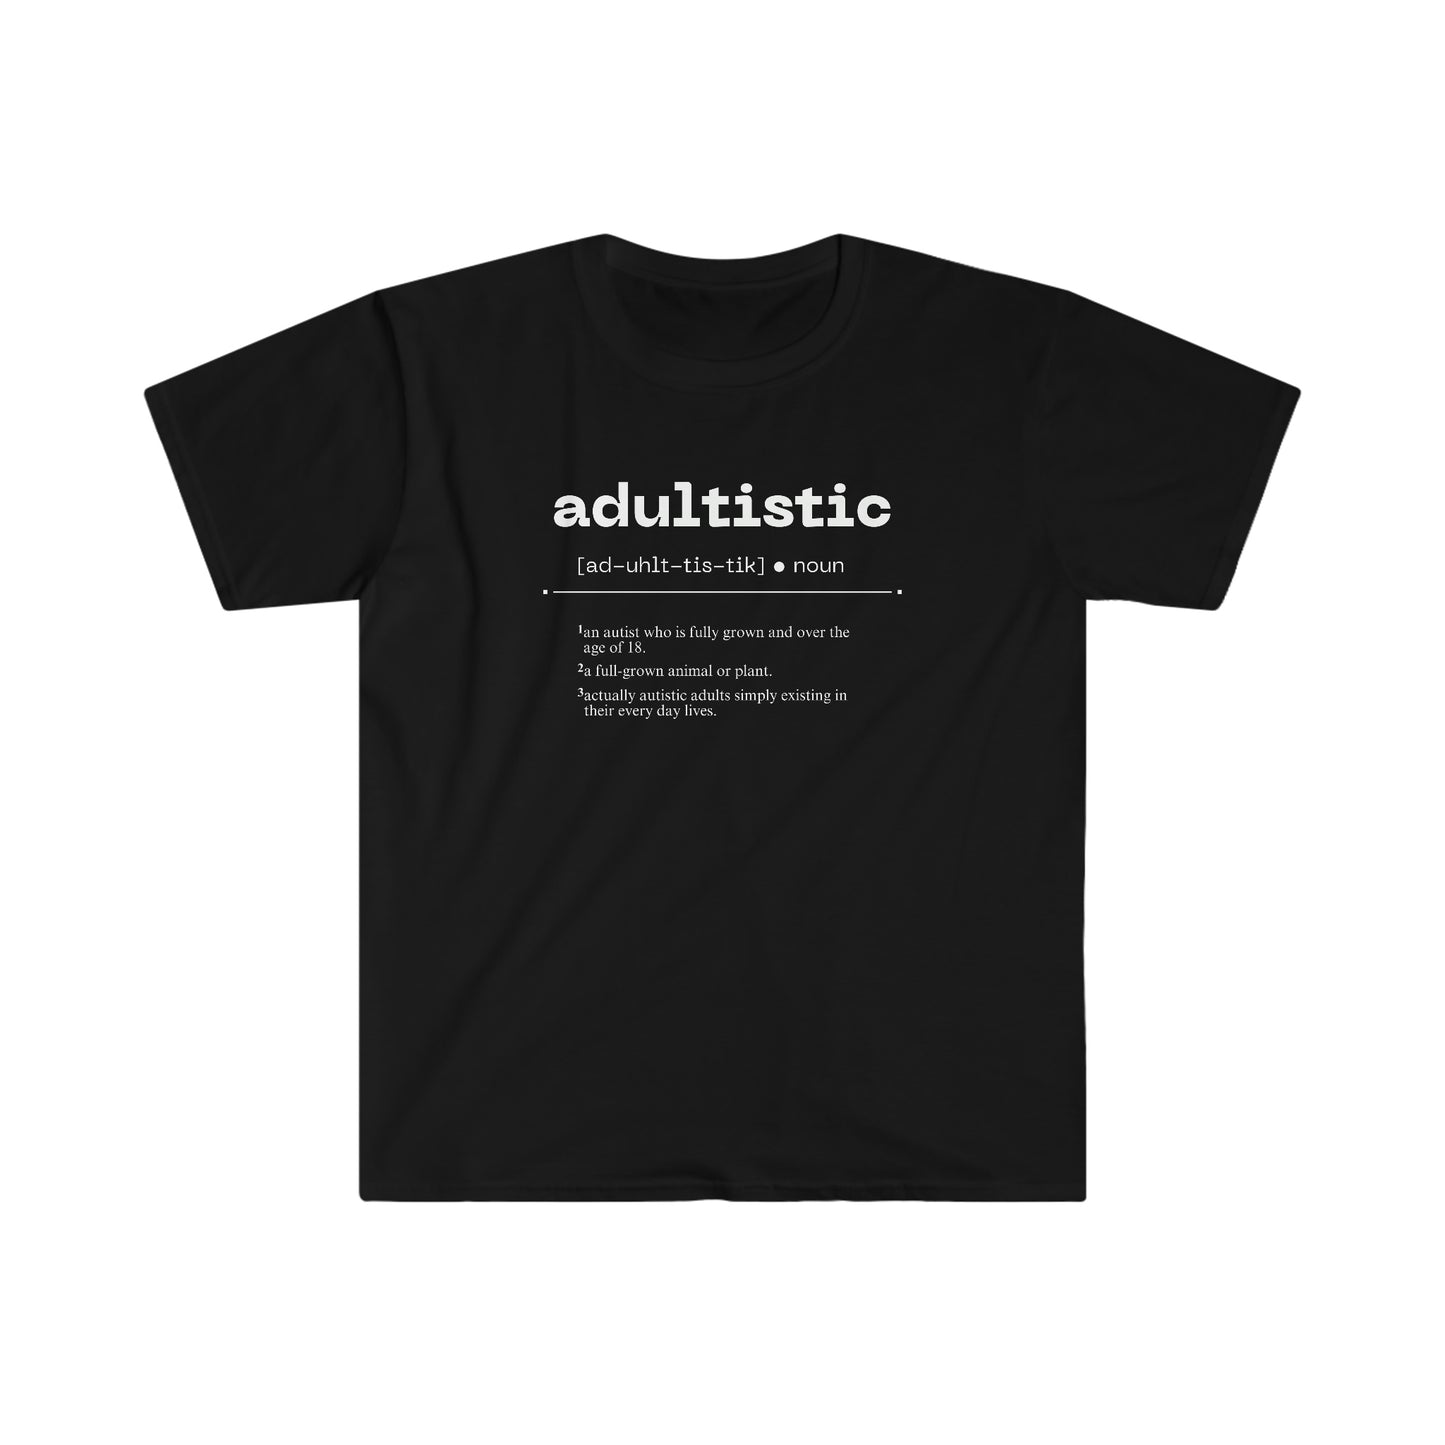 Adultistic [Redefined] Unisex Softstyle T-Shirt